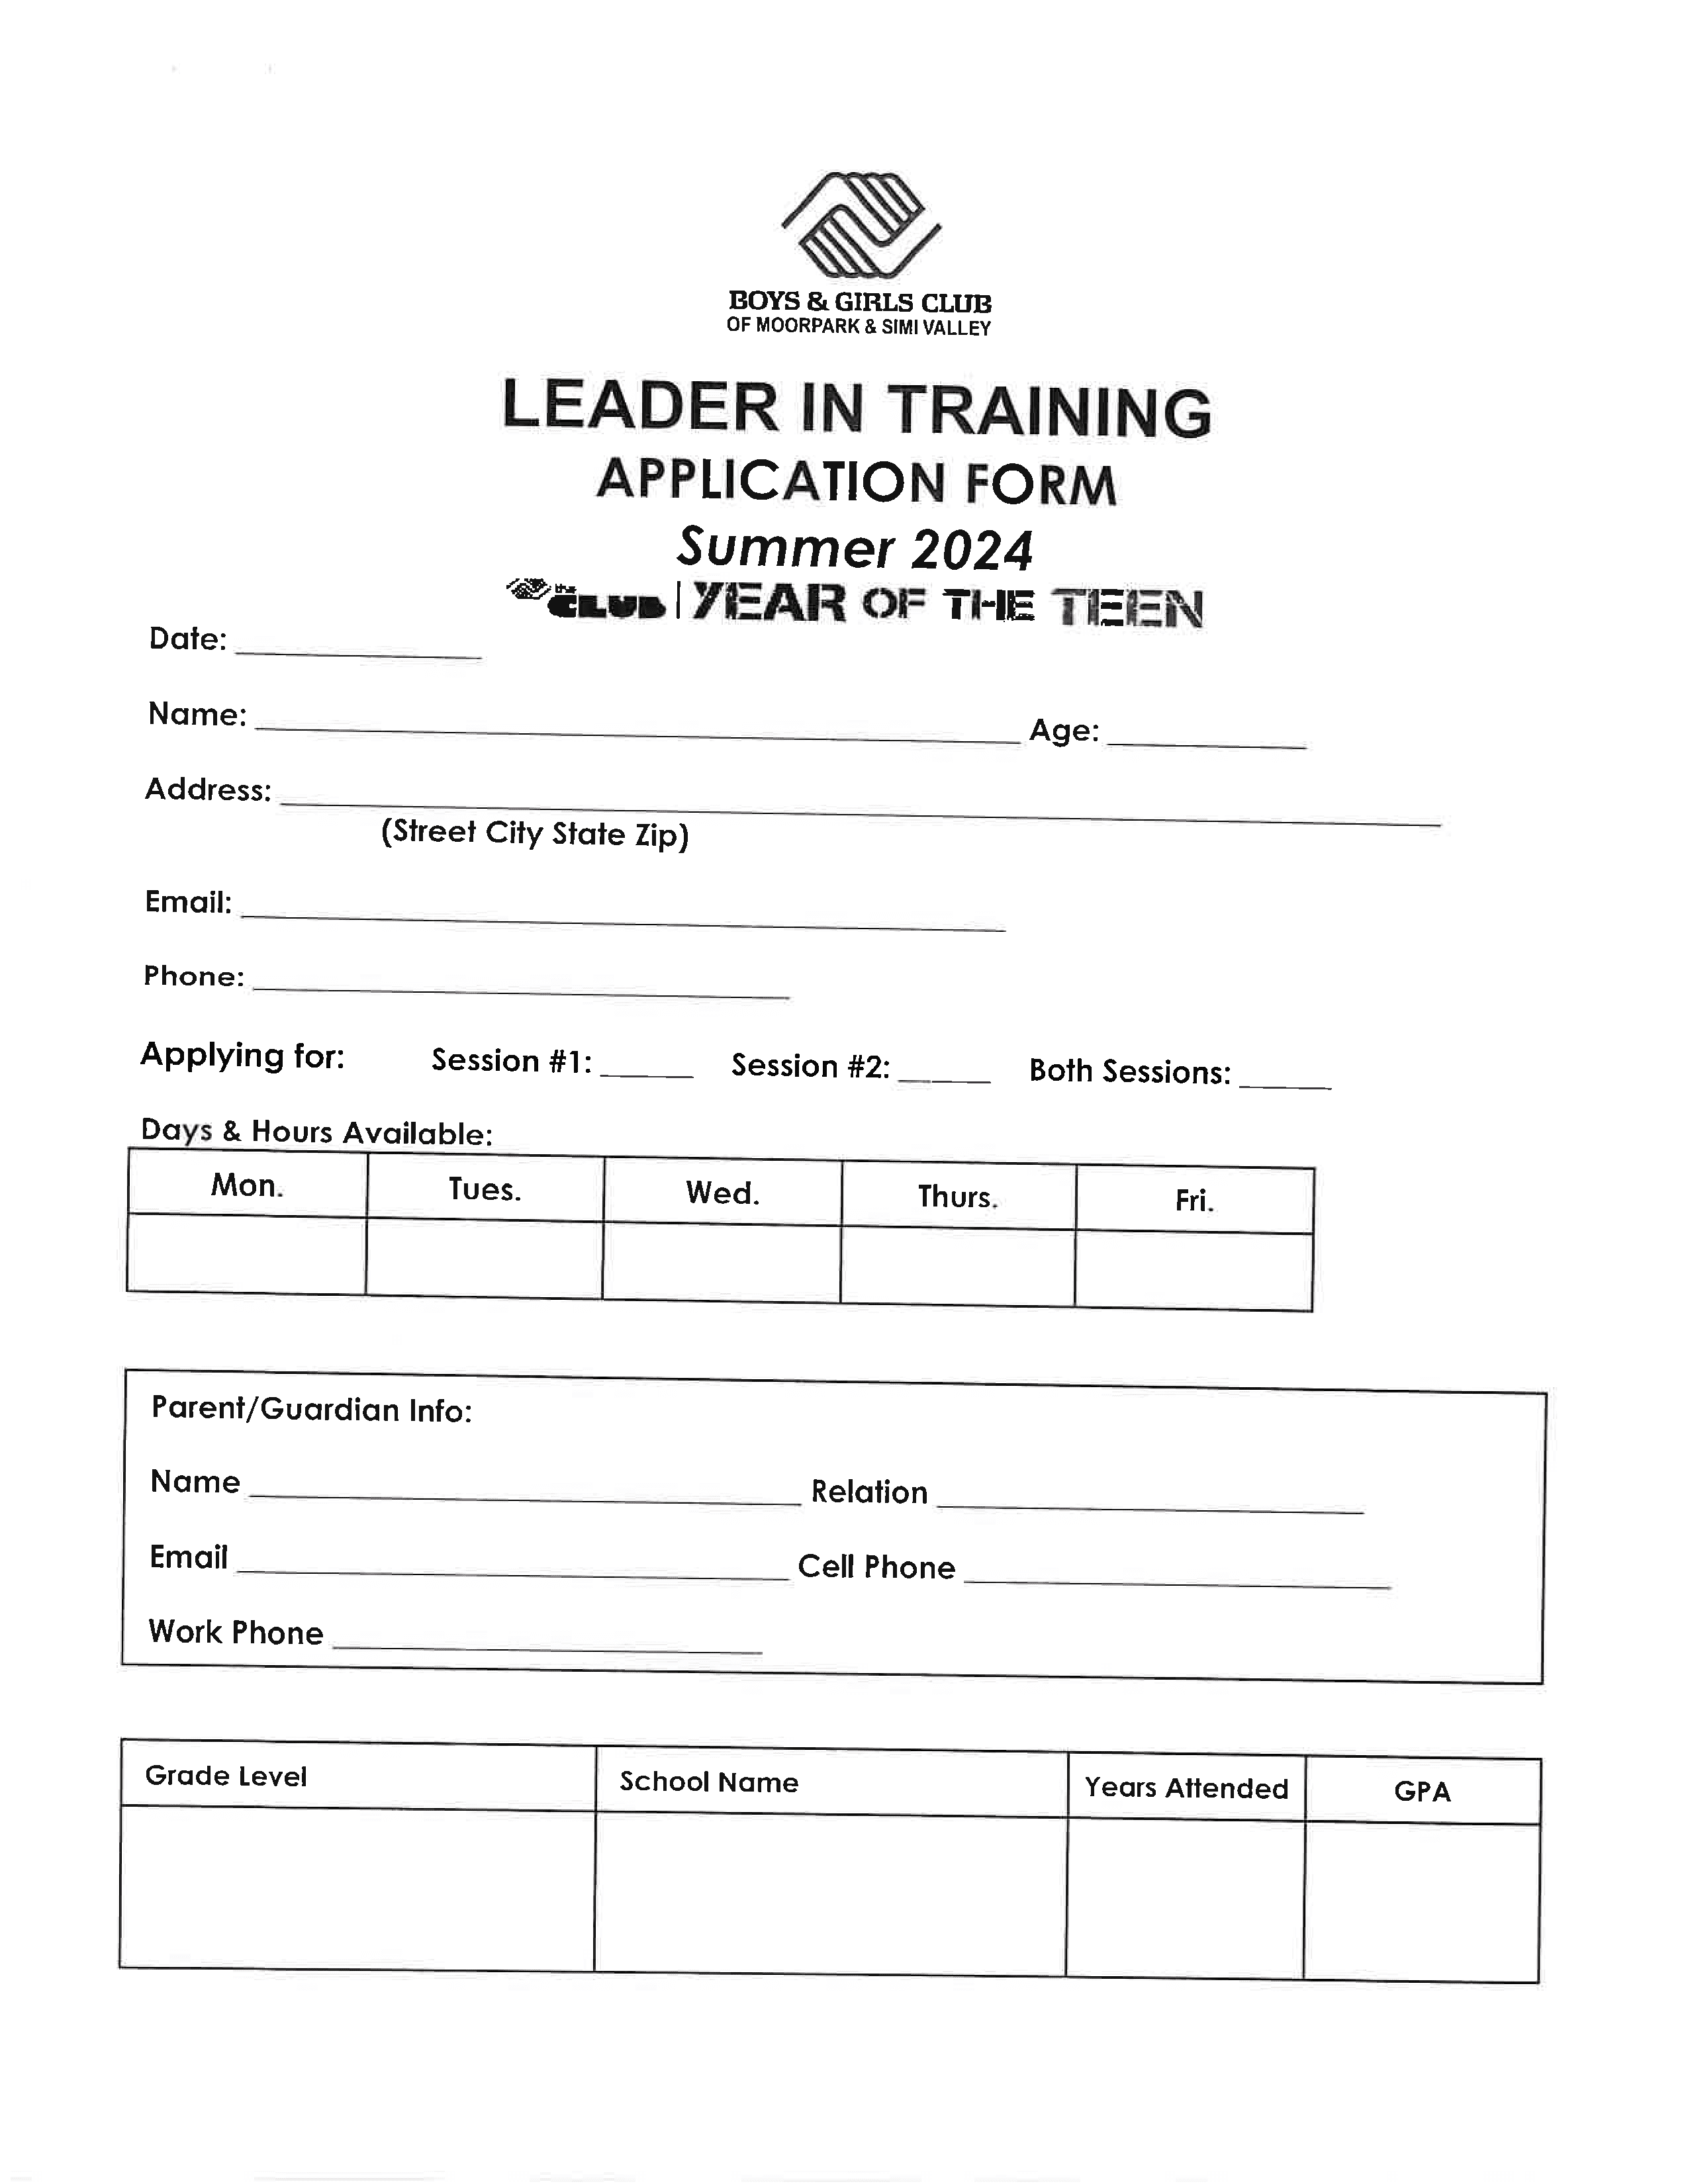 Leader In Training Application